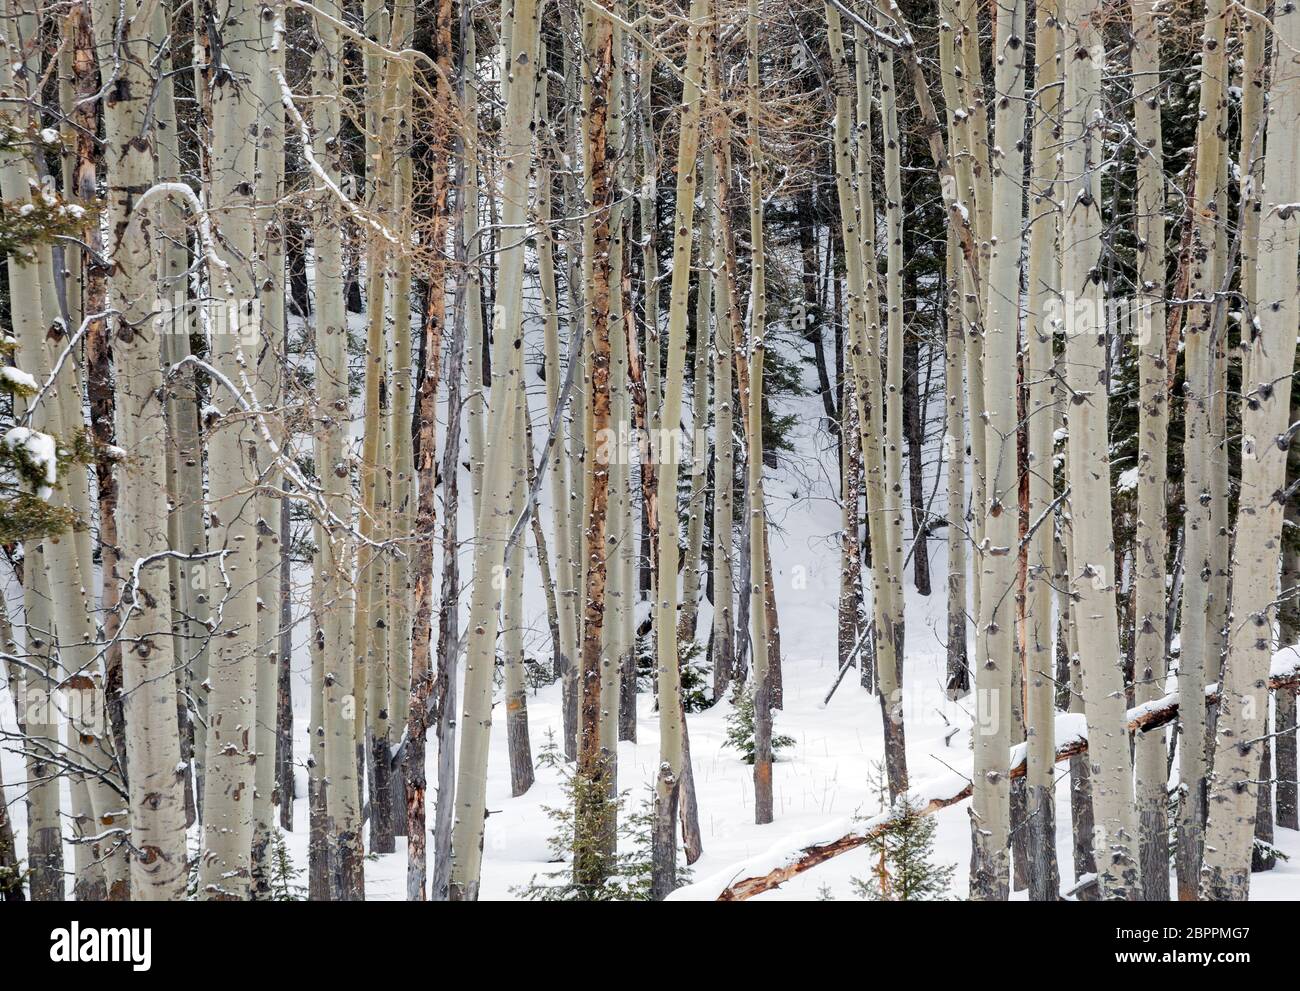 WY04456-00....WYOMING - Grove of aspens in the snow along the Howard Eaton Trail in Yellowstone National Park. Stock Photo